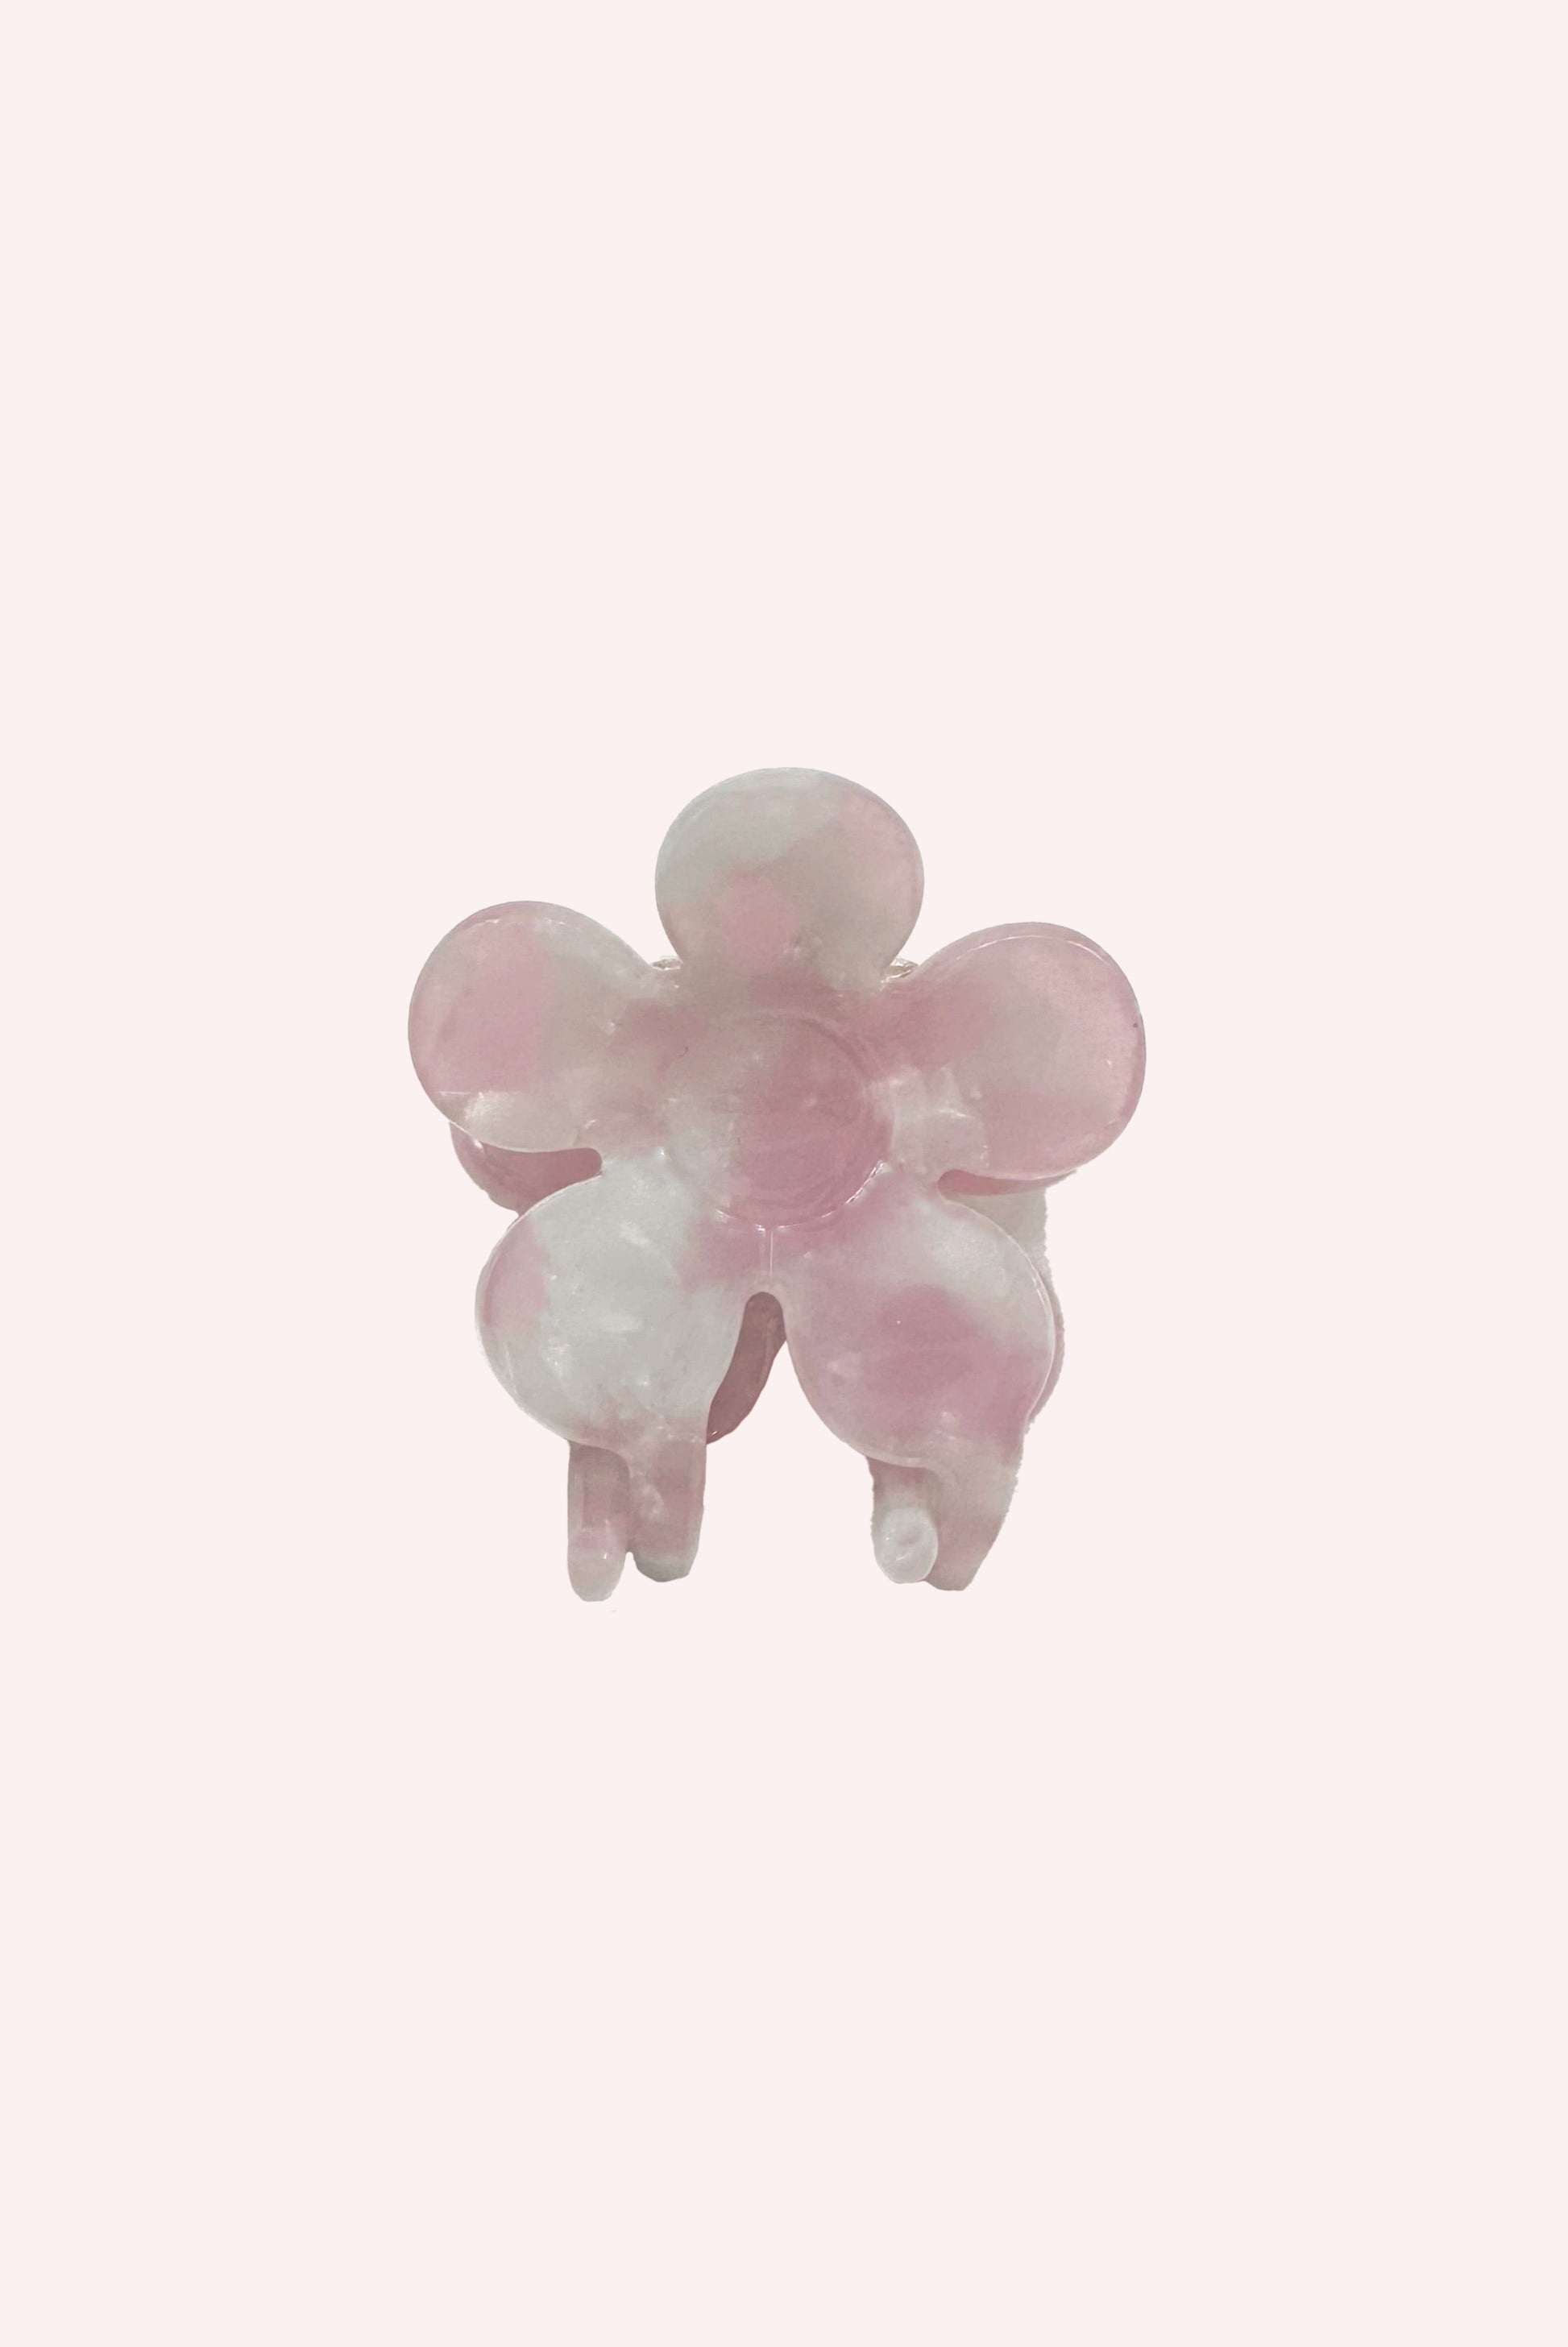 Petite Forget Me Not Flower Clip, Rose Quartz, top petal flower is with a mechanism for strong grip